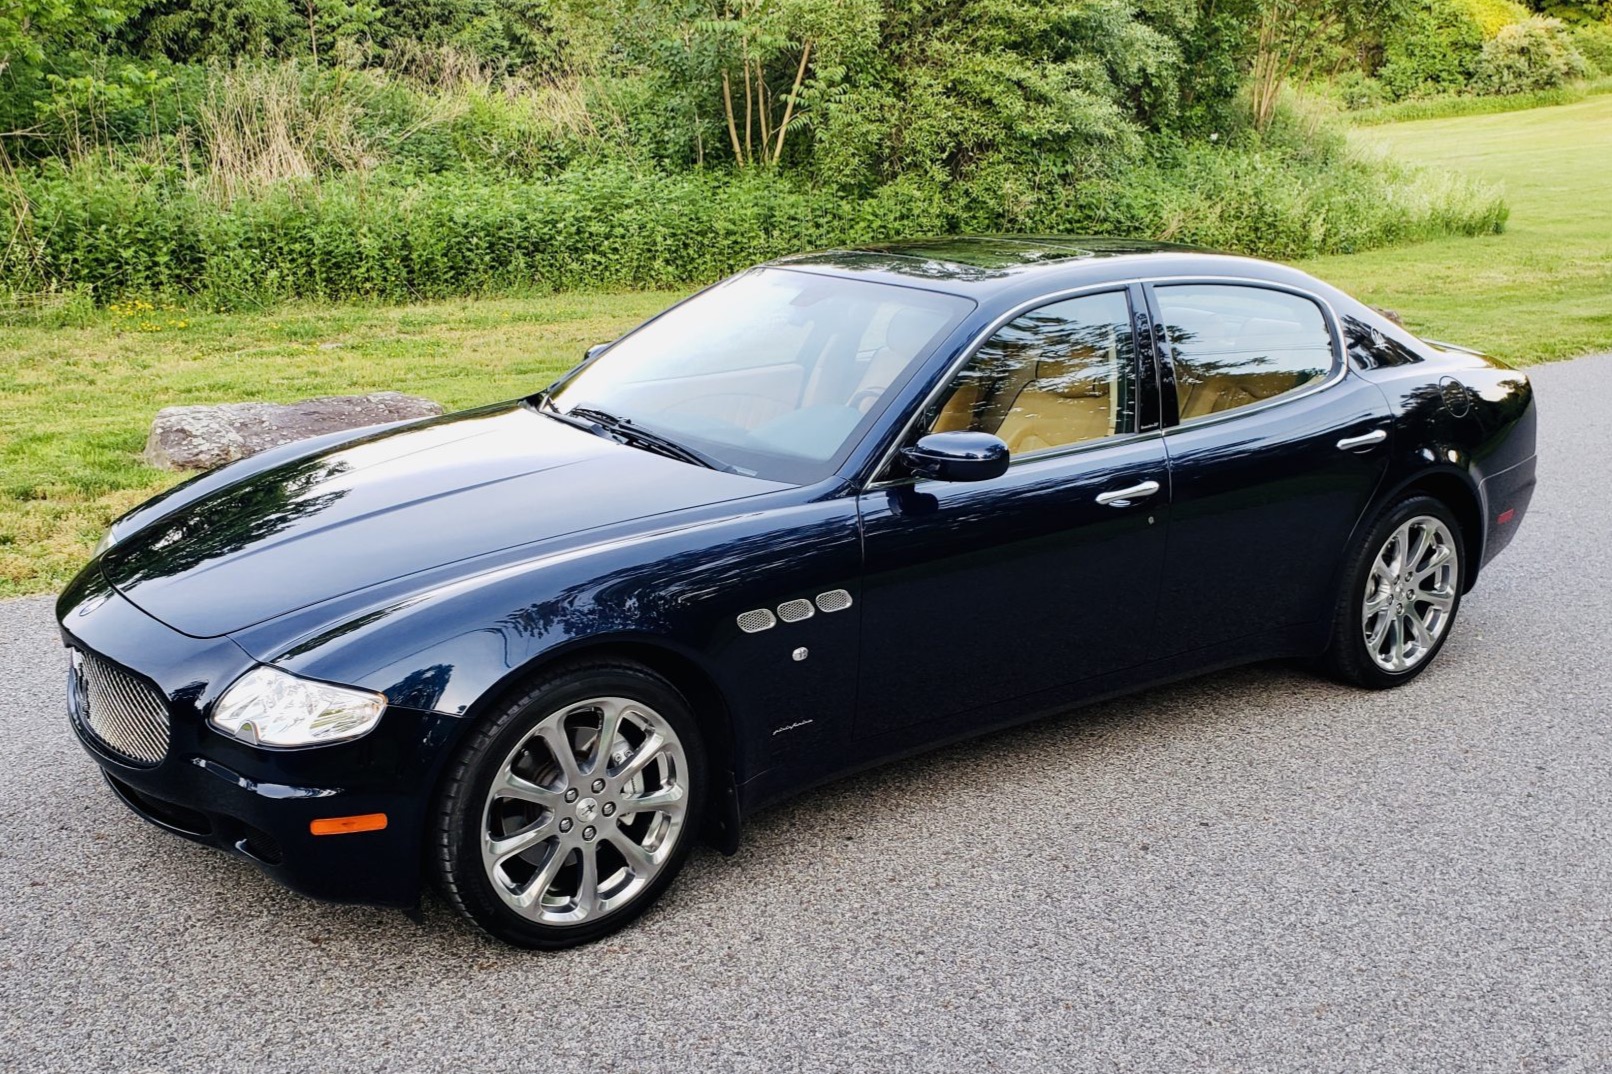 27k-Mile 2007 Maserati Quattroporte Executive GT for sale on BaT Auctions -  sold for $27,500 on June 18, 2020 (Lot #32,880) | Bring a Trailer